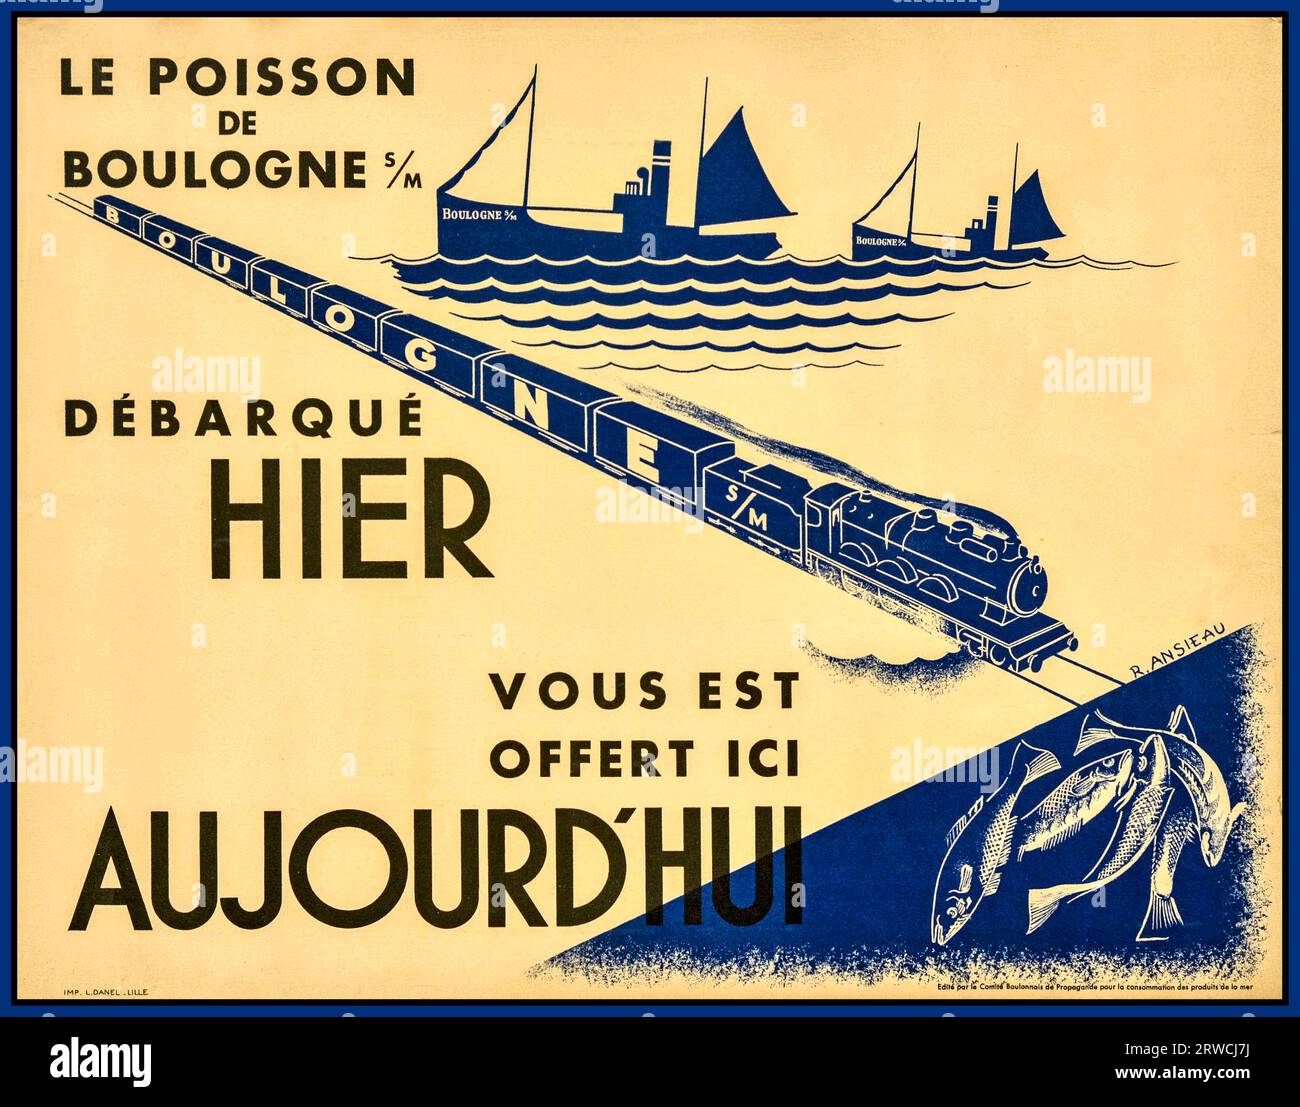 Vintage French Historic Fishing advertising poster for Fresh Boulogne Fish /“ Le Poisson de Boulogne” featuring a poster illustration of fishing boats and fast steam train. “ Landed yesterday and offered to you here today” / “Debarque hier vous est offert ici aujourd'hui.”   Printed in France. Horizontal. designer: R. Ansieau Stock Photo